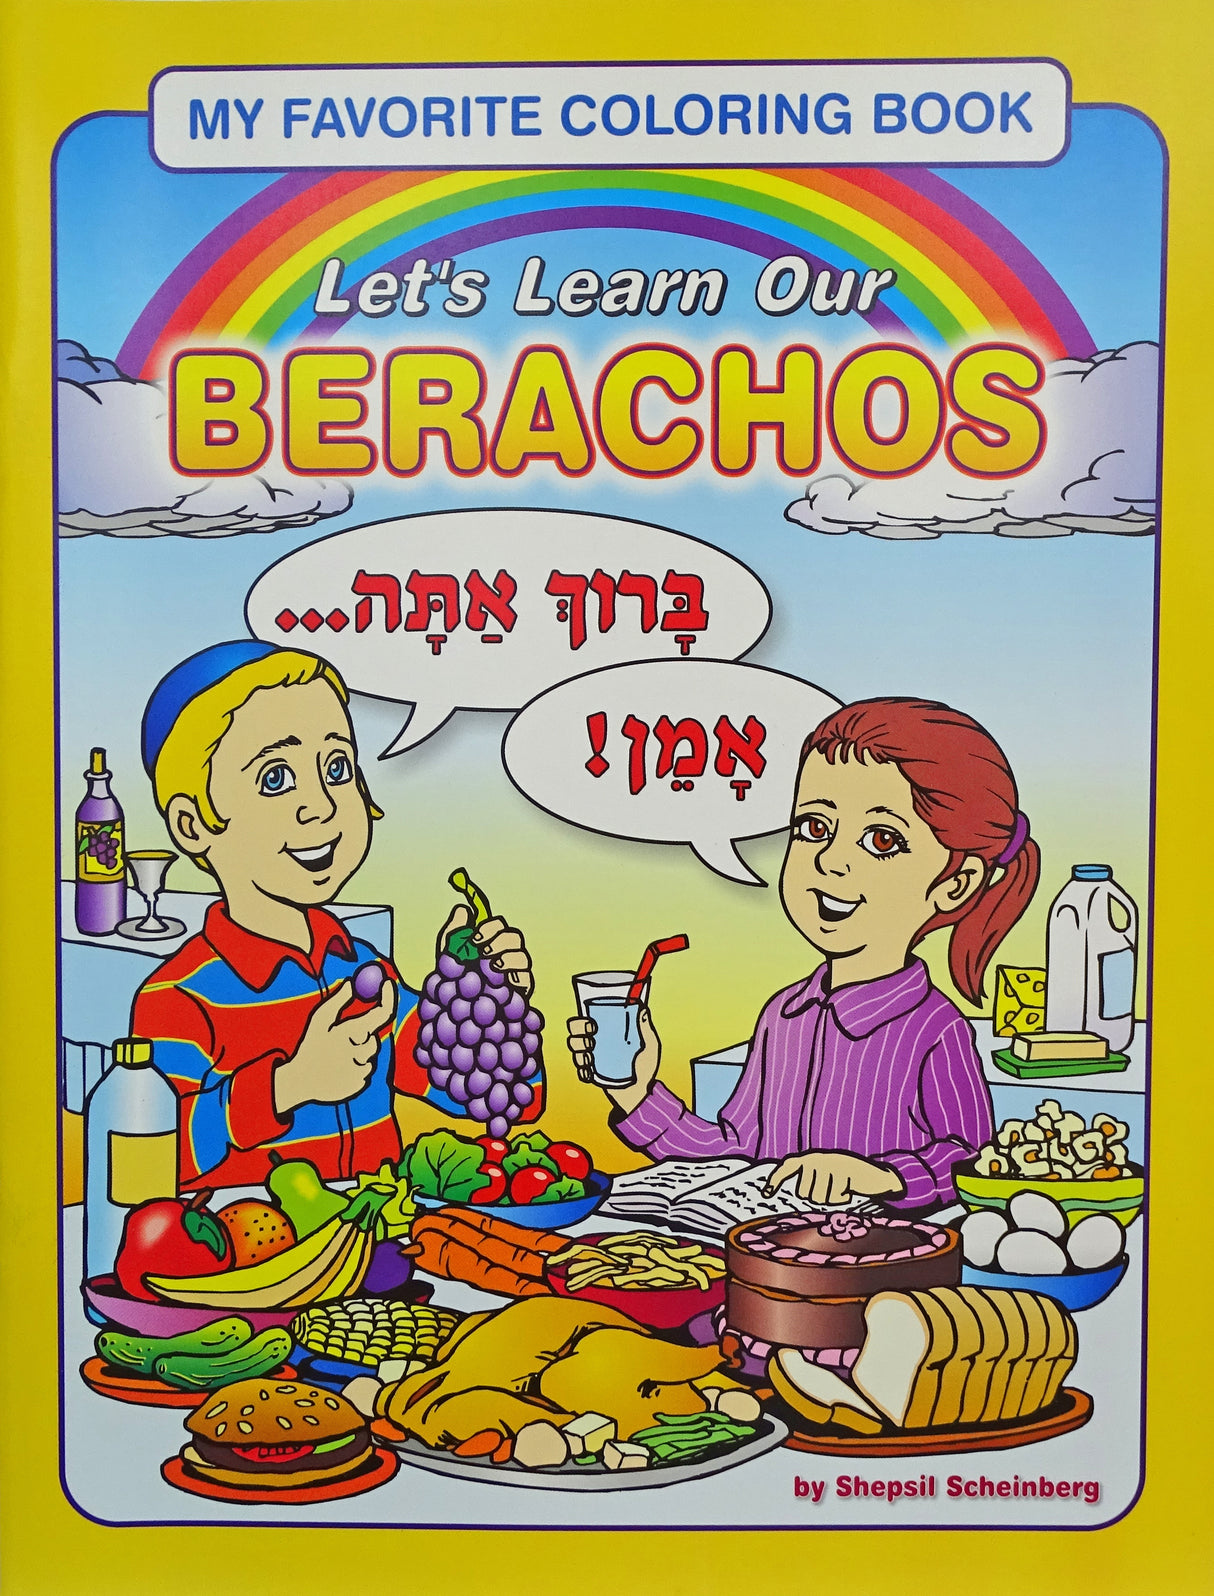 Let's Learn Our Berachos - Colouring Book